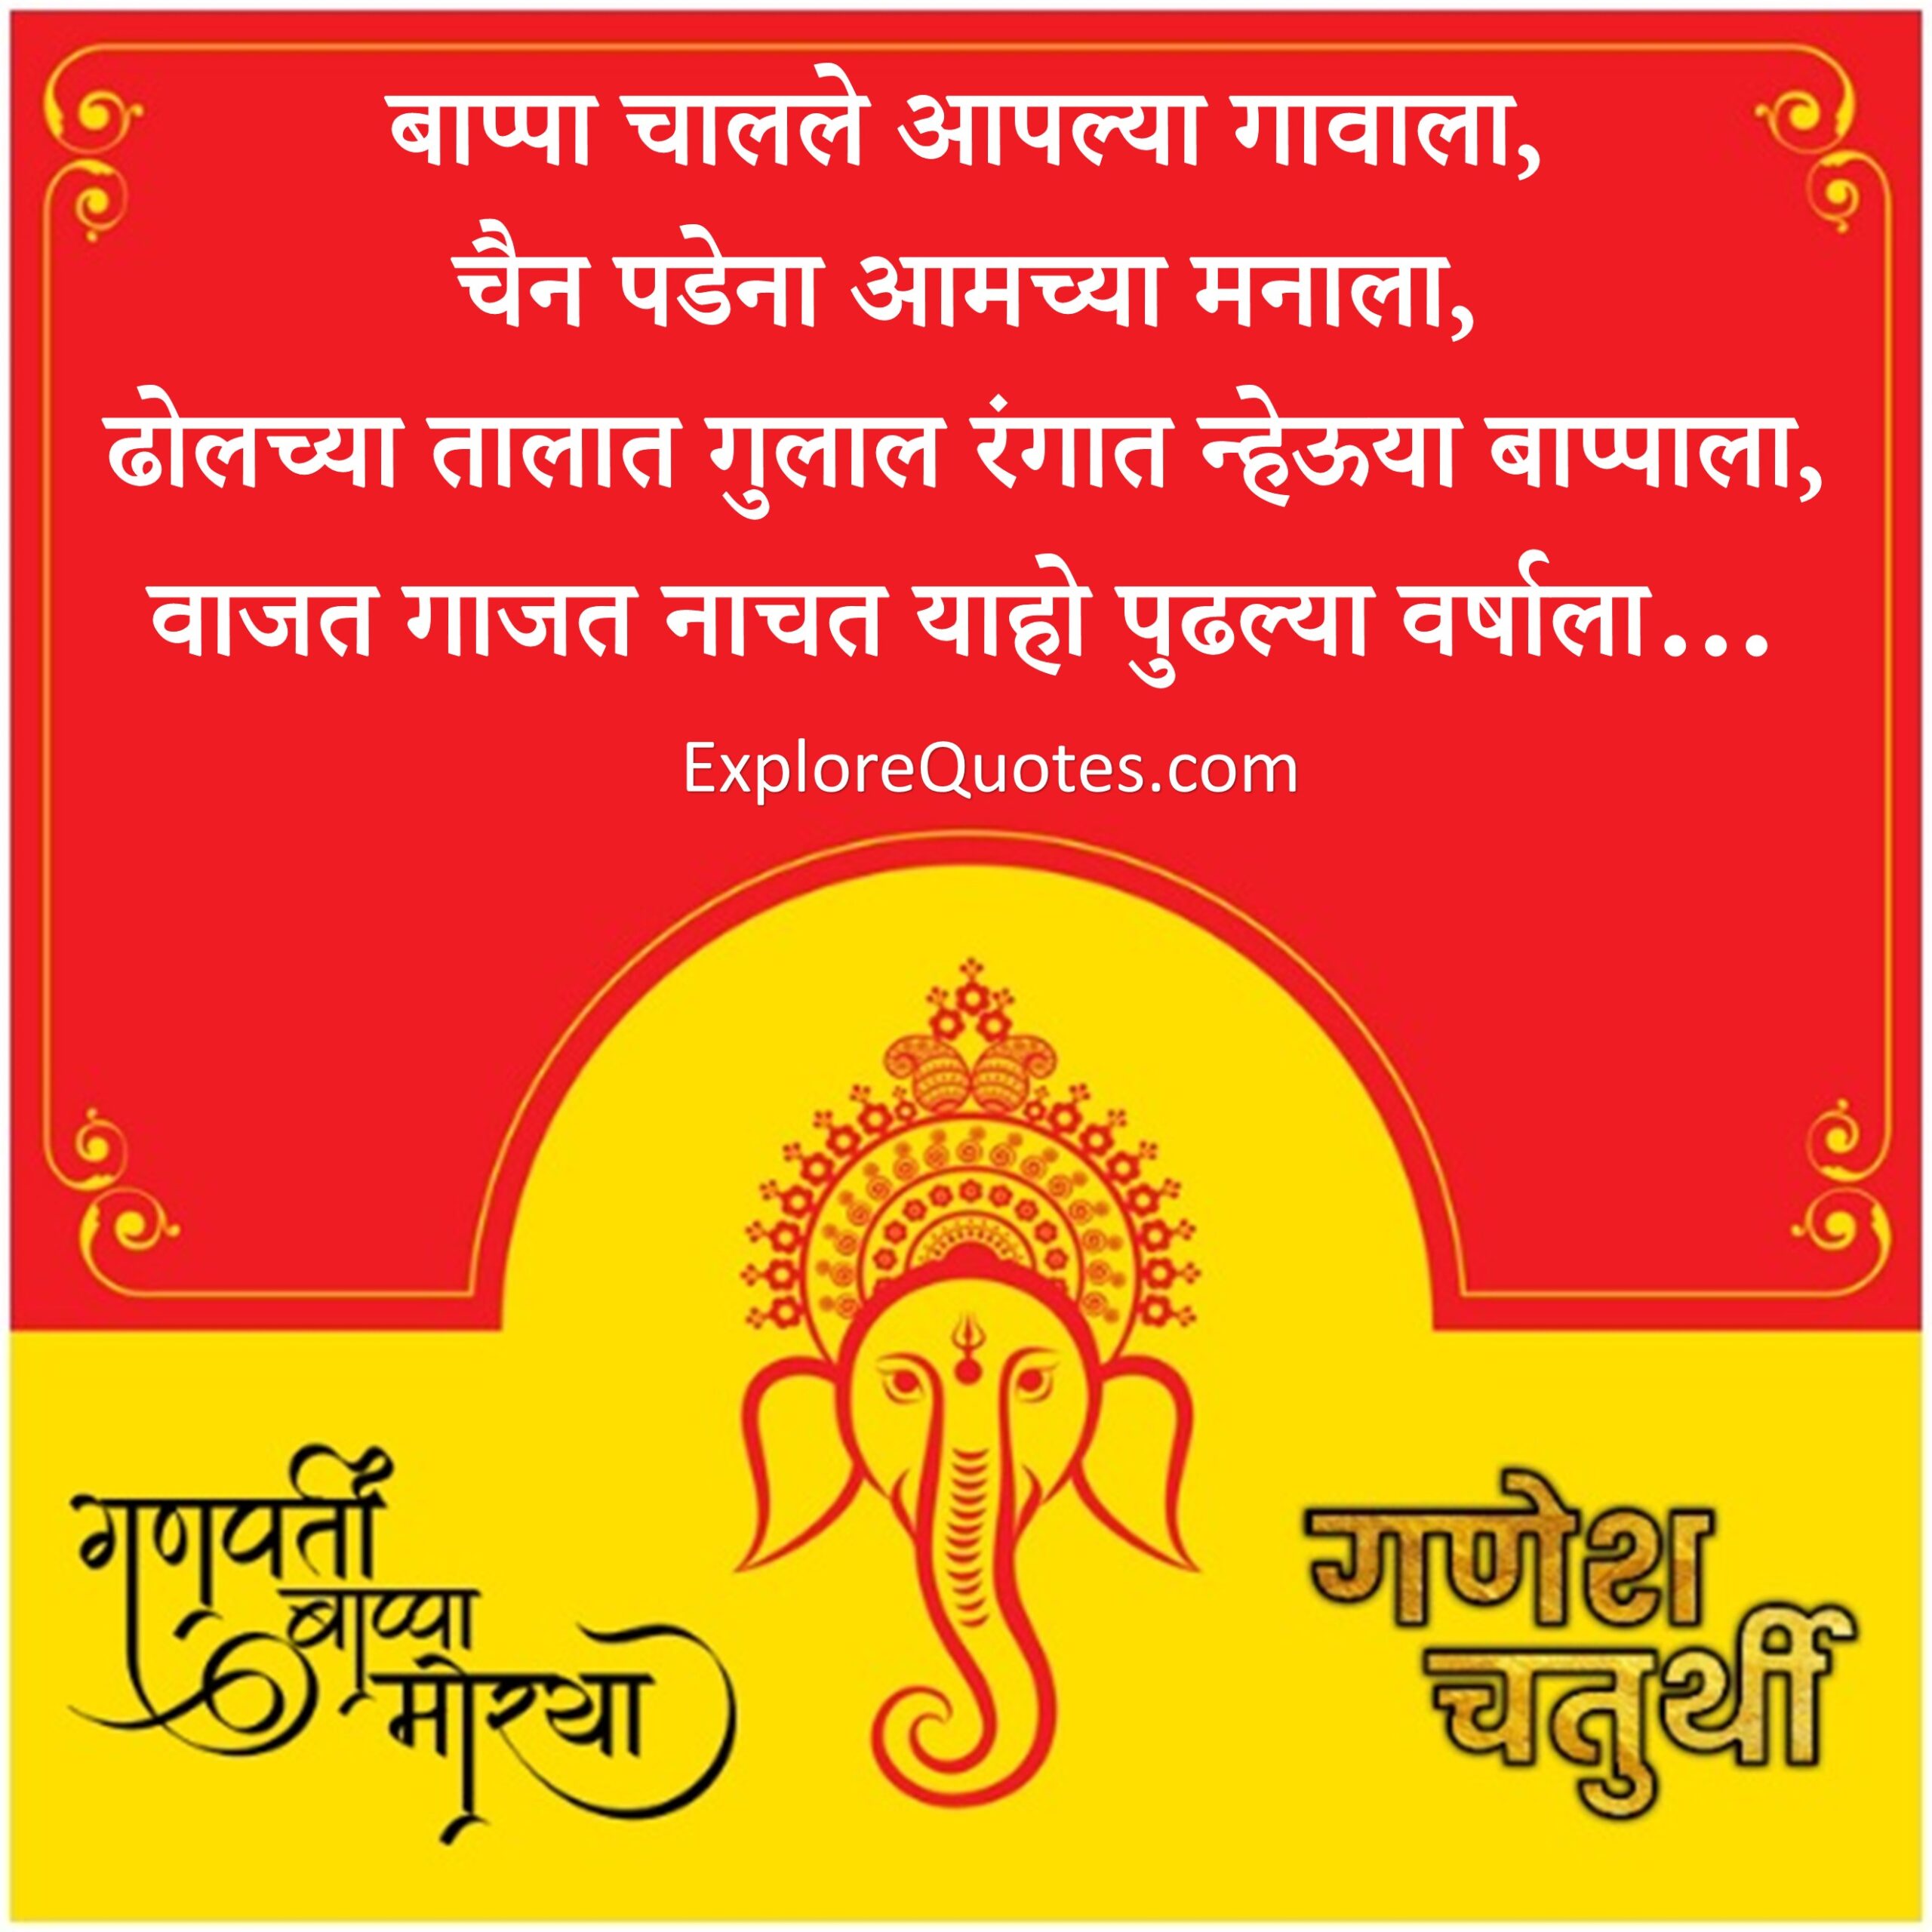 Ganesh Chaturthi Sms Quotes In Marathi Explore Quotes Hindi ganpati status will be searched one day before ganesh chaturthi by devotees so we have collected these ganesh chaturthi quotes in hindi for your whatsapp status. ganesh chaturthi sms quotes in marathi